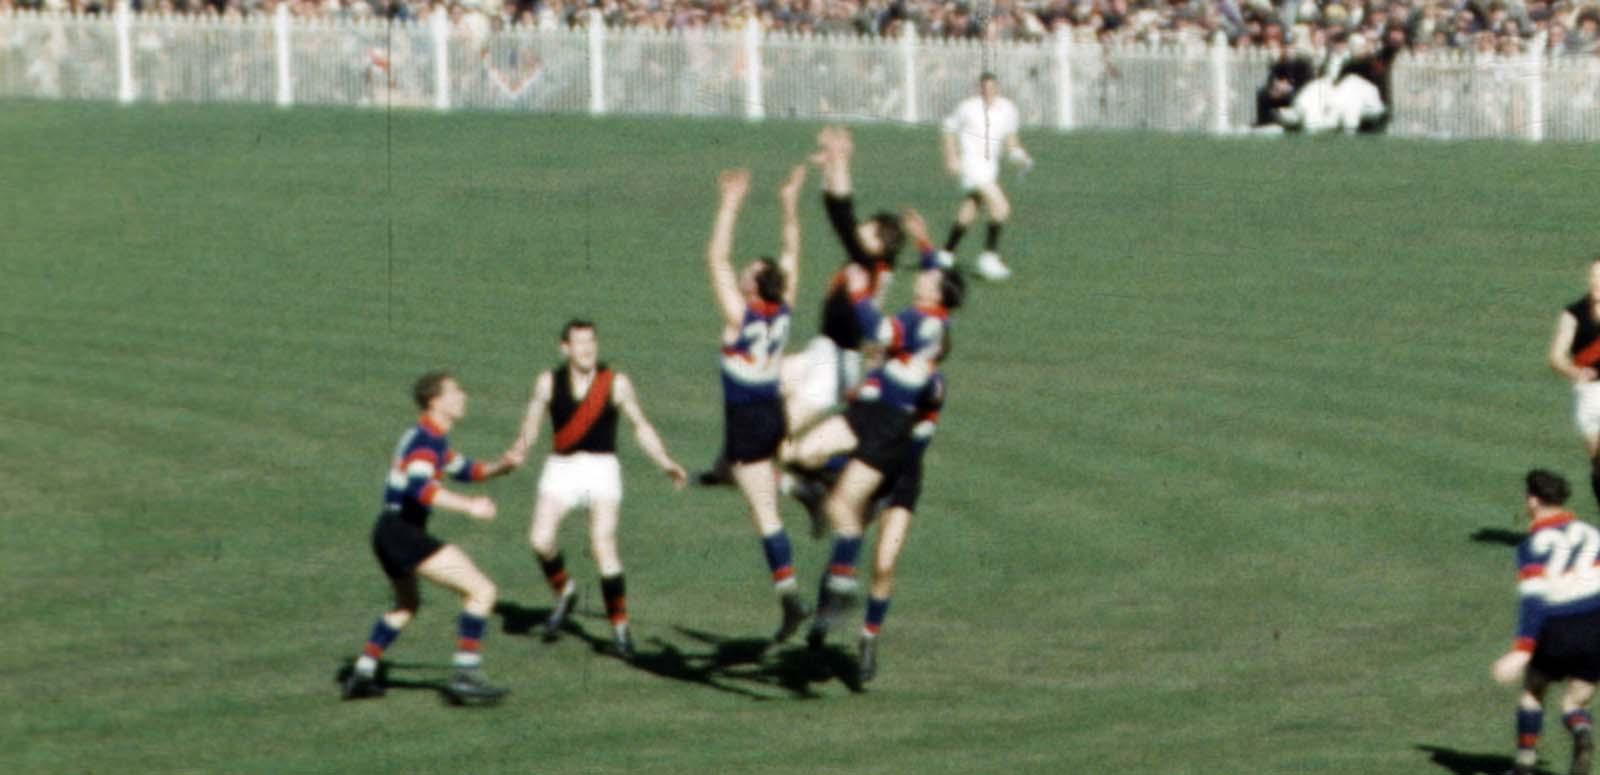 A 1953 AFL game in progress between Footscray and Essendon